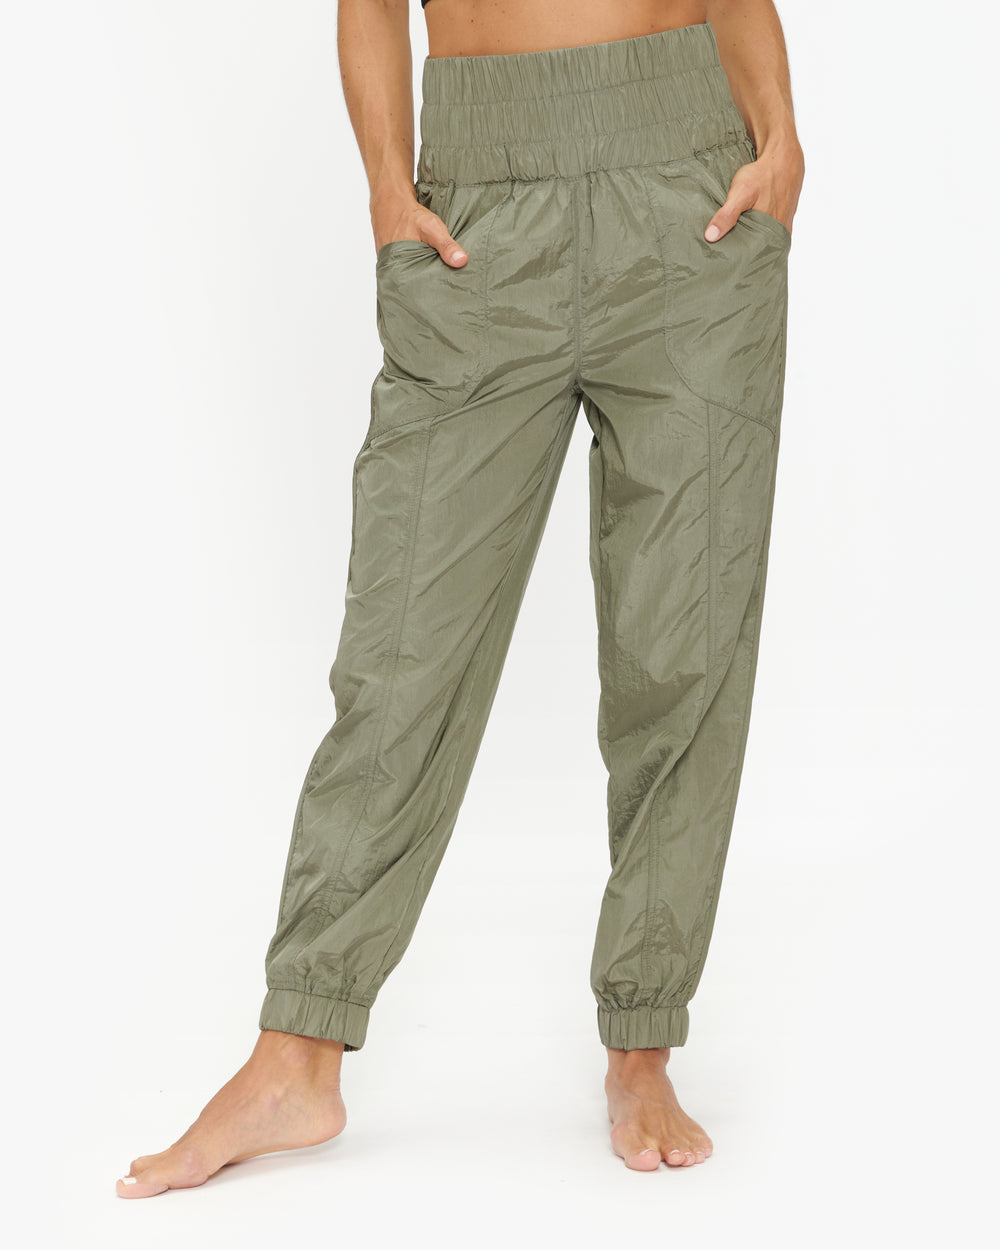 FREE PEOPLE WAY HOME JOGGER